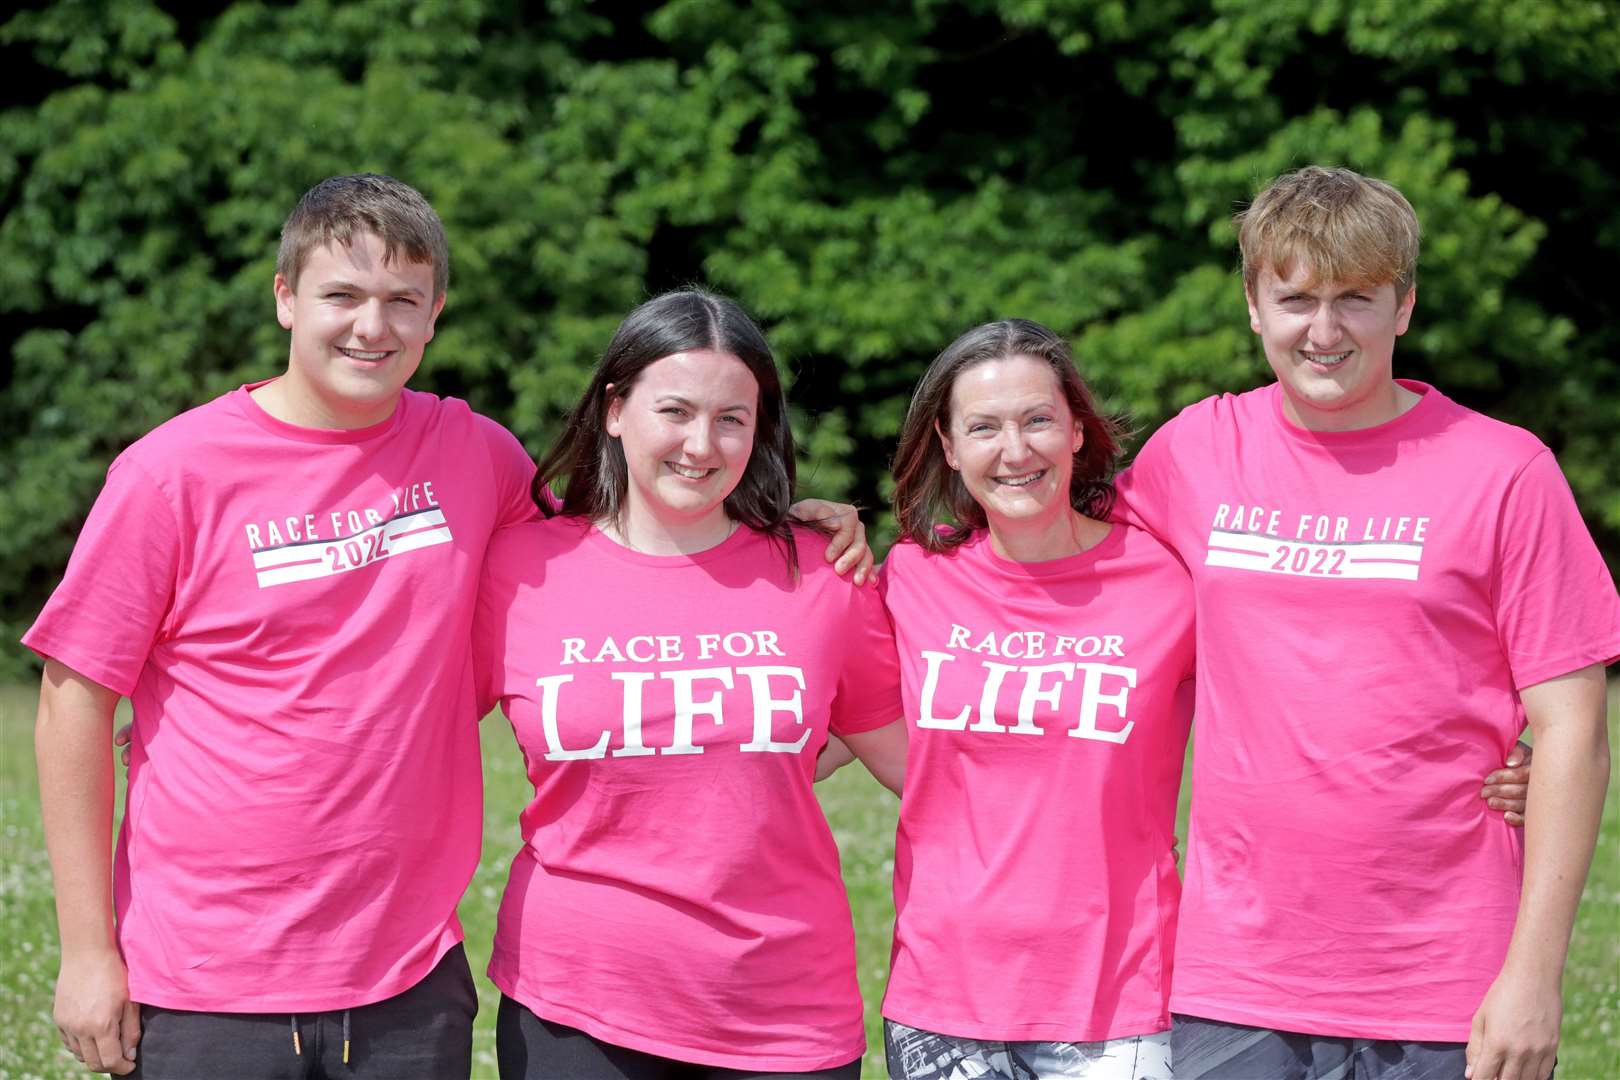 The Collie family from Maidstone, running for Cancer Research UK. Picture: Southern News & Pictures